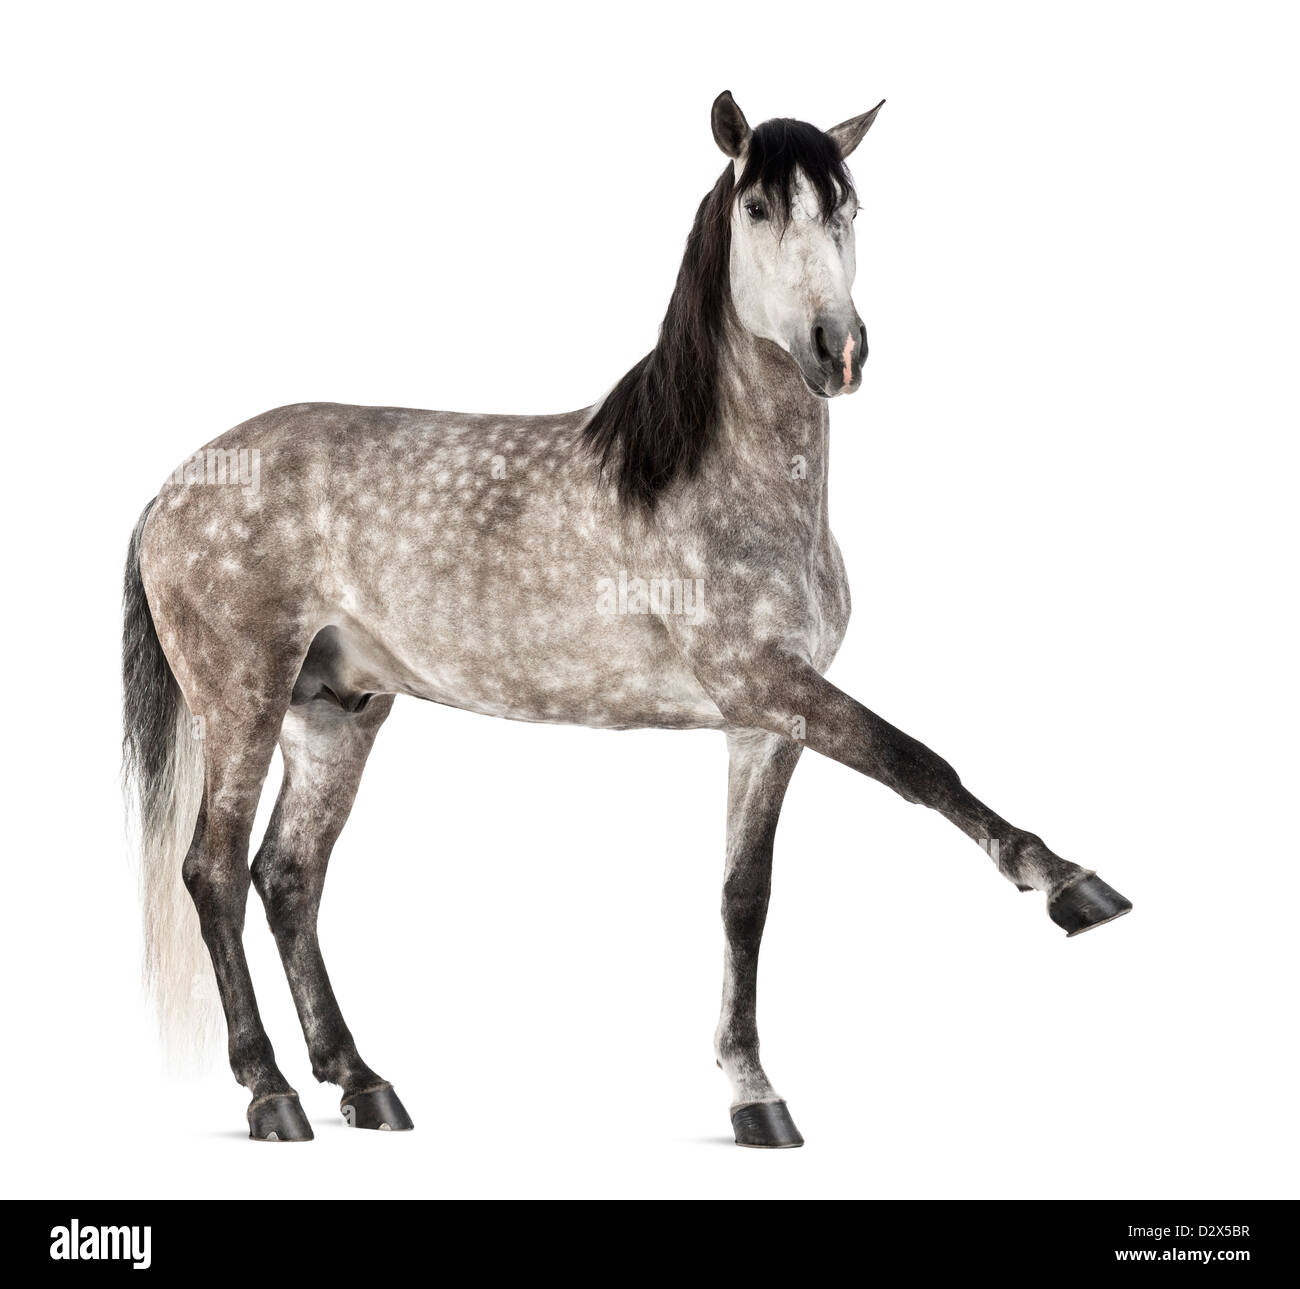 Andalusian raising leg, 7 years old, also known as the Pure Spanish Horse or PRE, portrait against white background Stock Photo